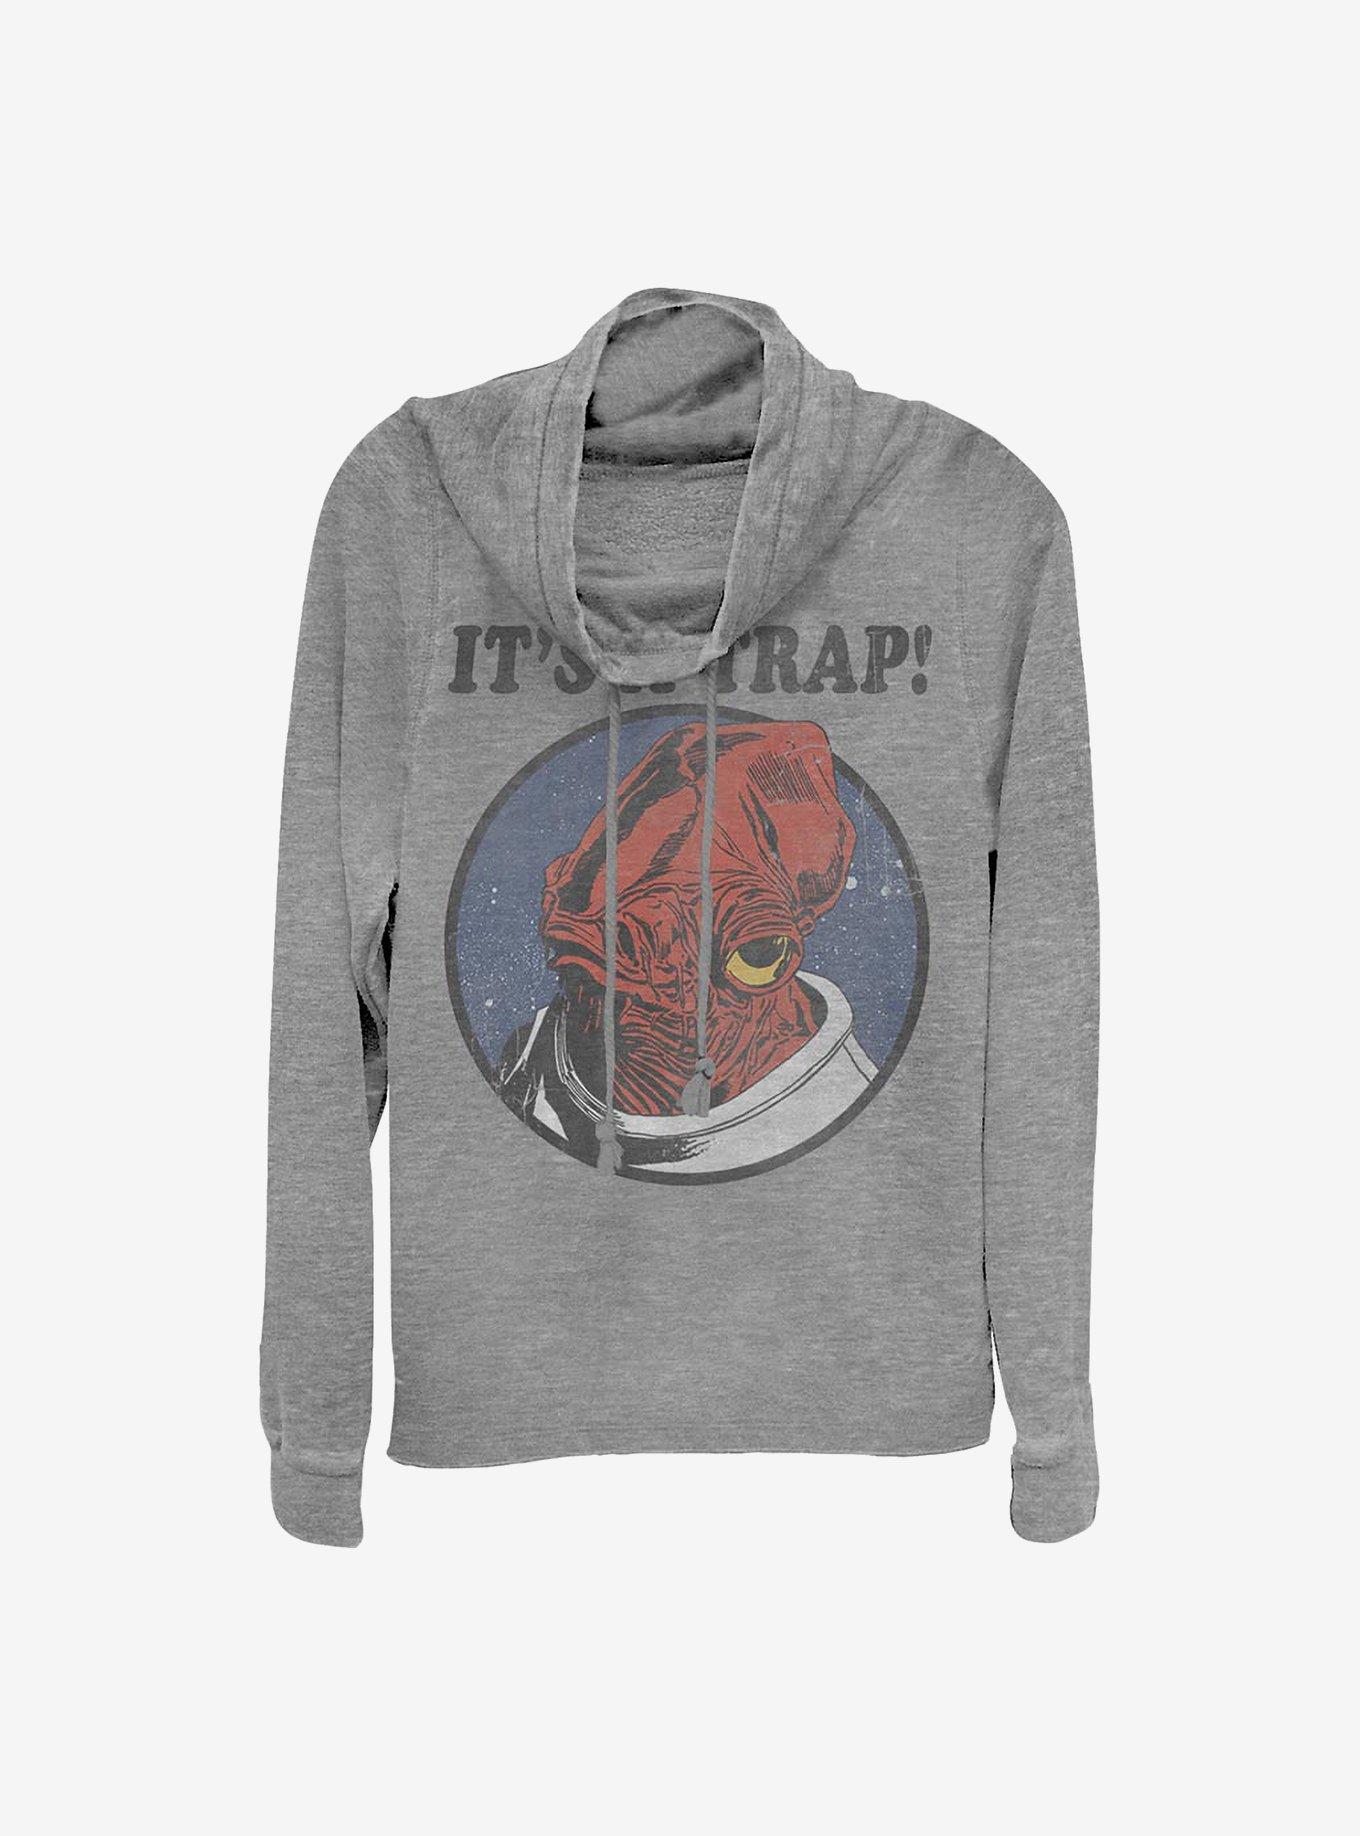 Star Wars It's A Trap Cowlneck Long-Sleeve Girls Top, GRAY HTR, hi-res